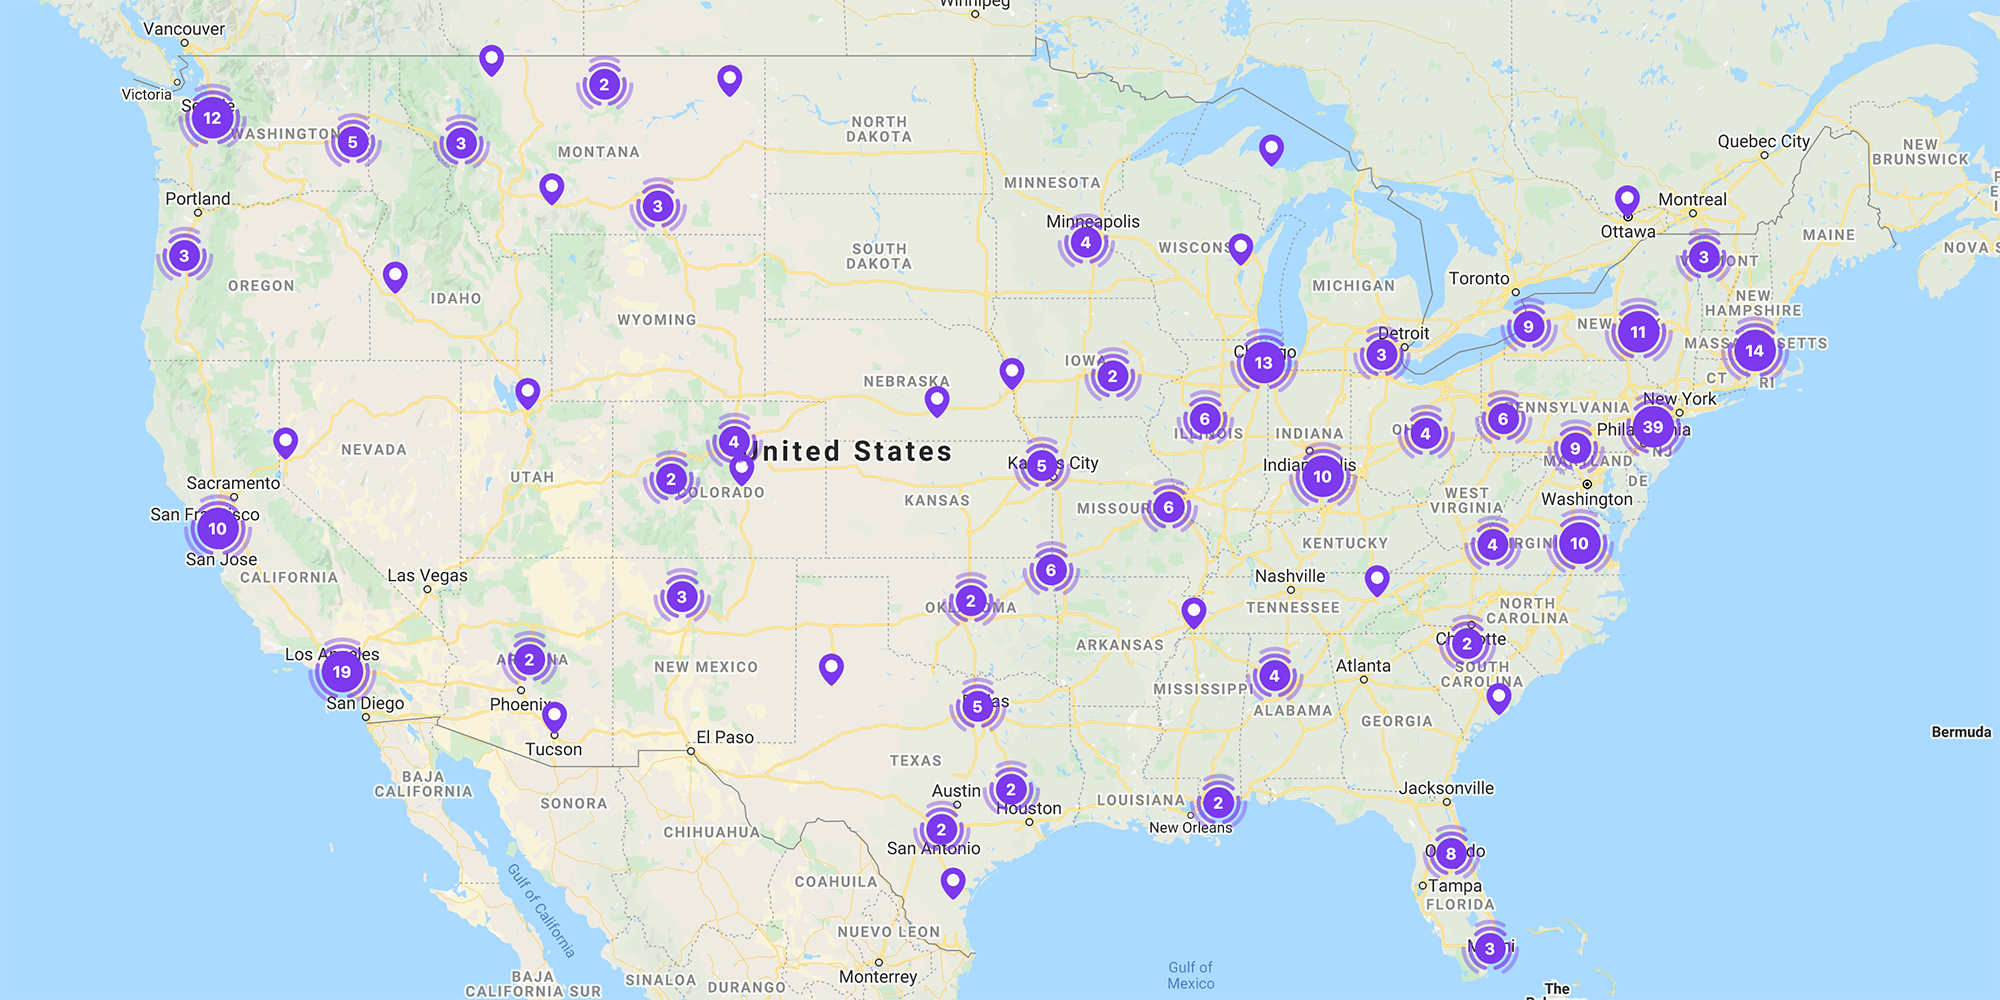 Colleges around the United States